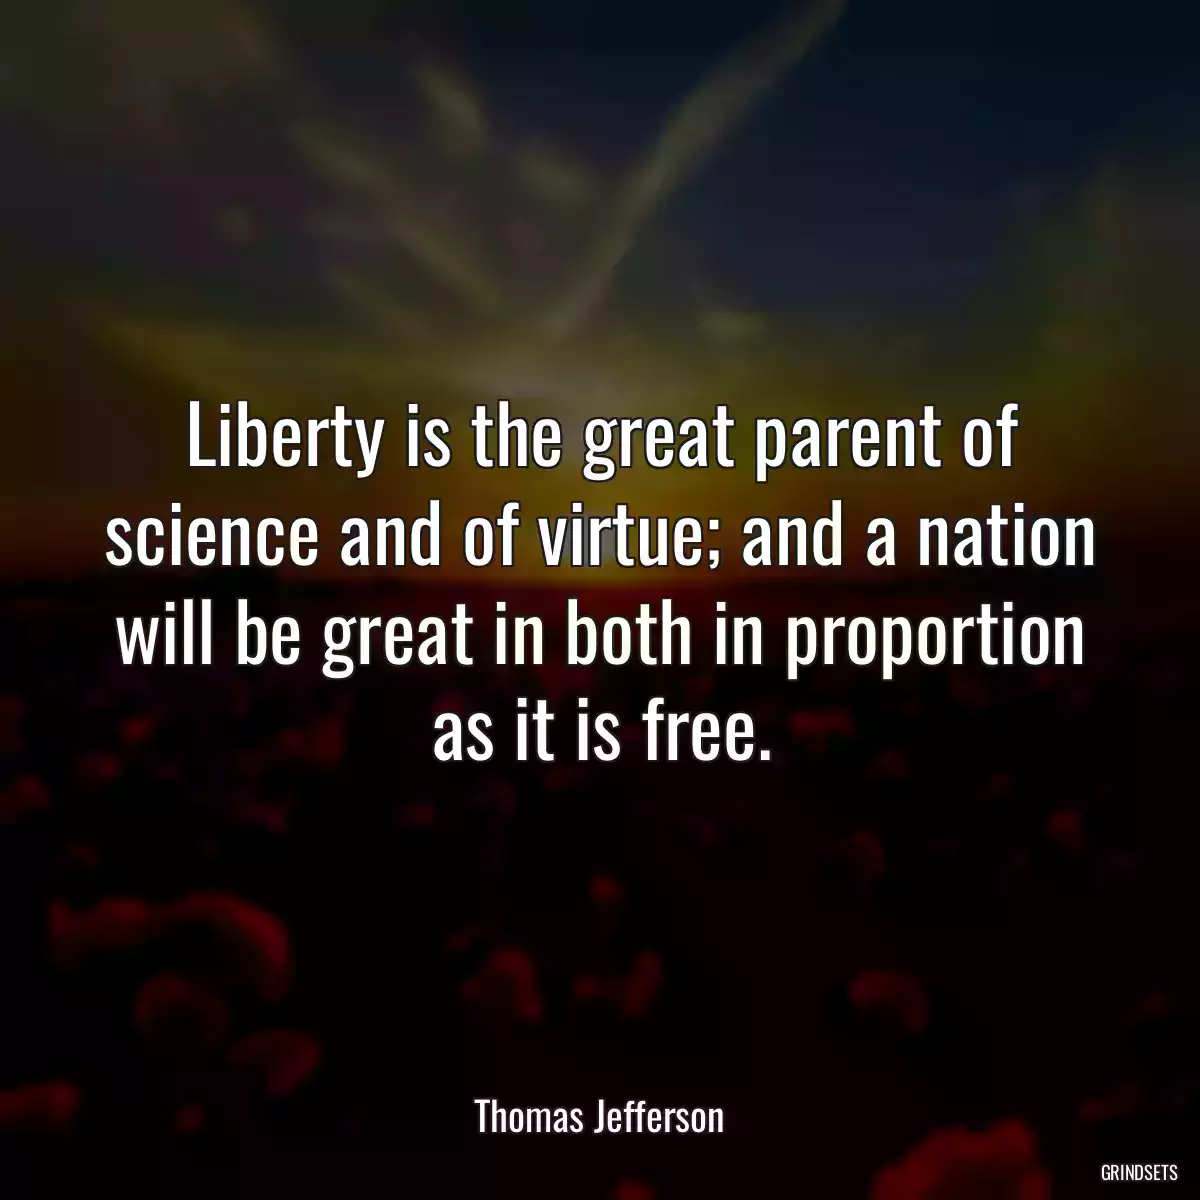 Liberty is the great parent of science and of virtue; and a nation will be great in both in proportion as it is free.